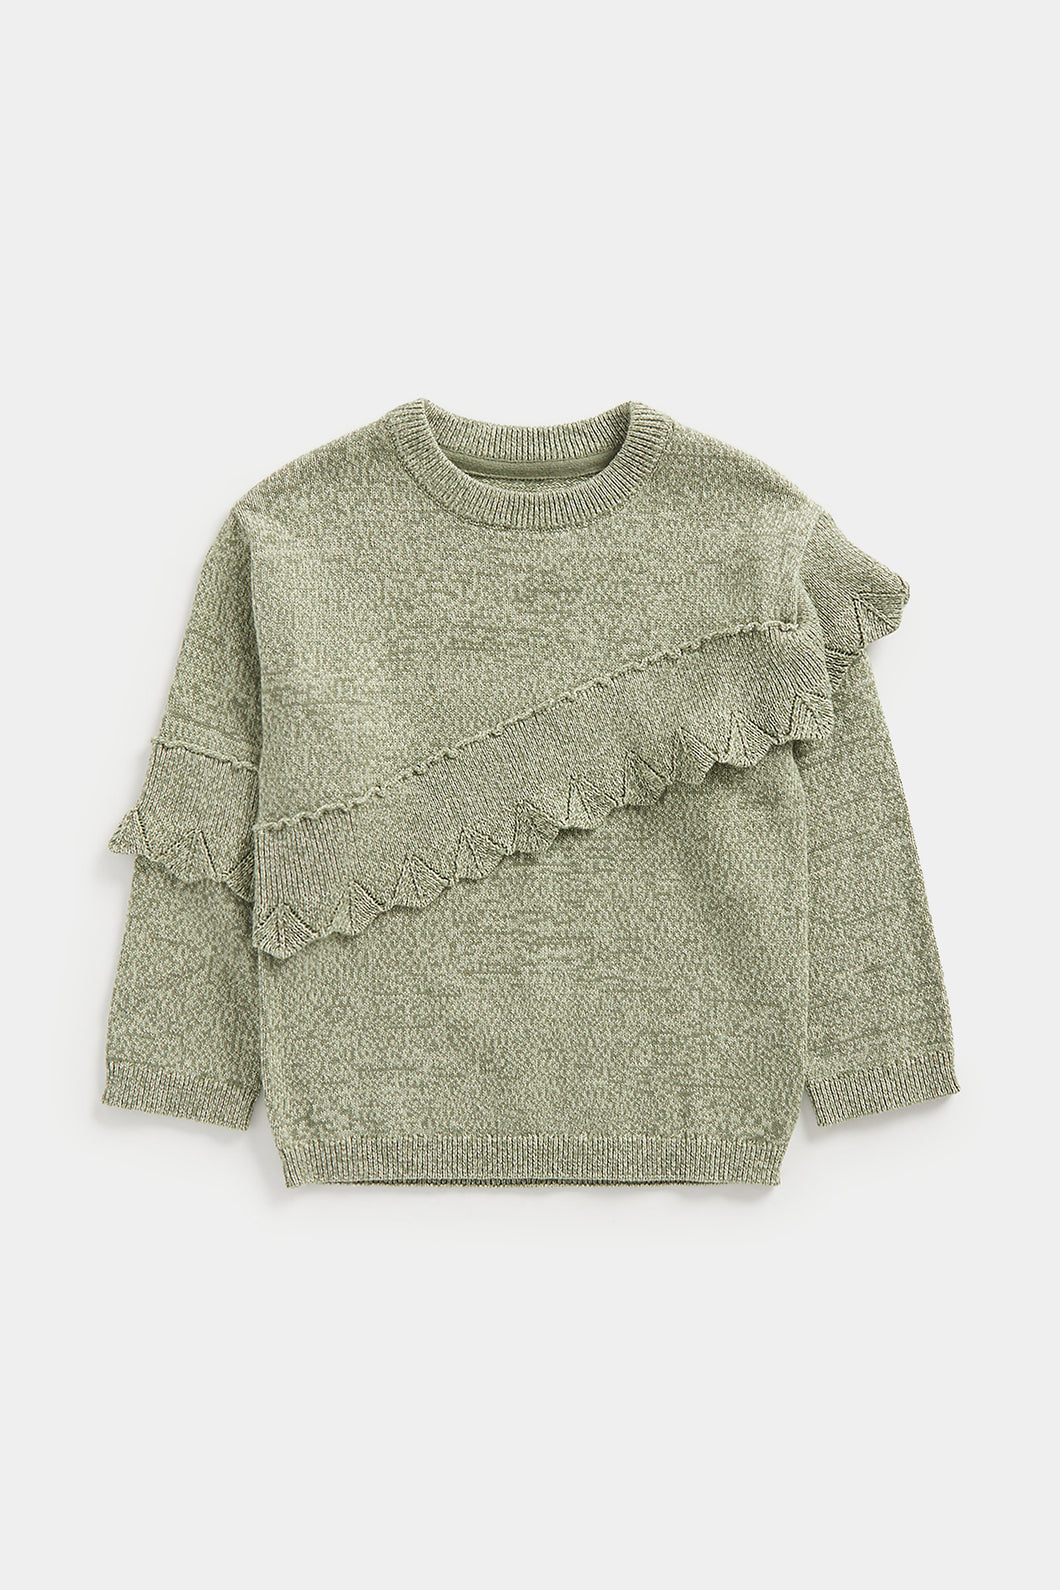 Mothercare Green Knitted Jumper with Frill